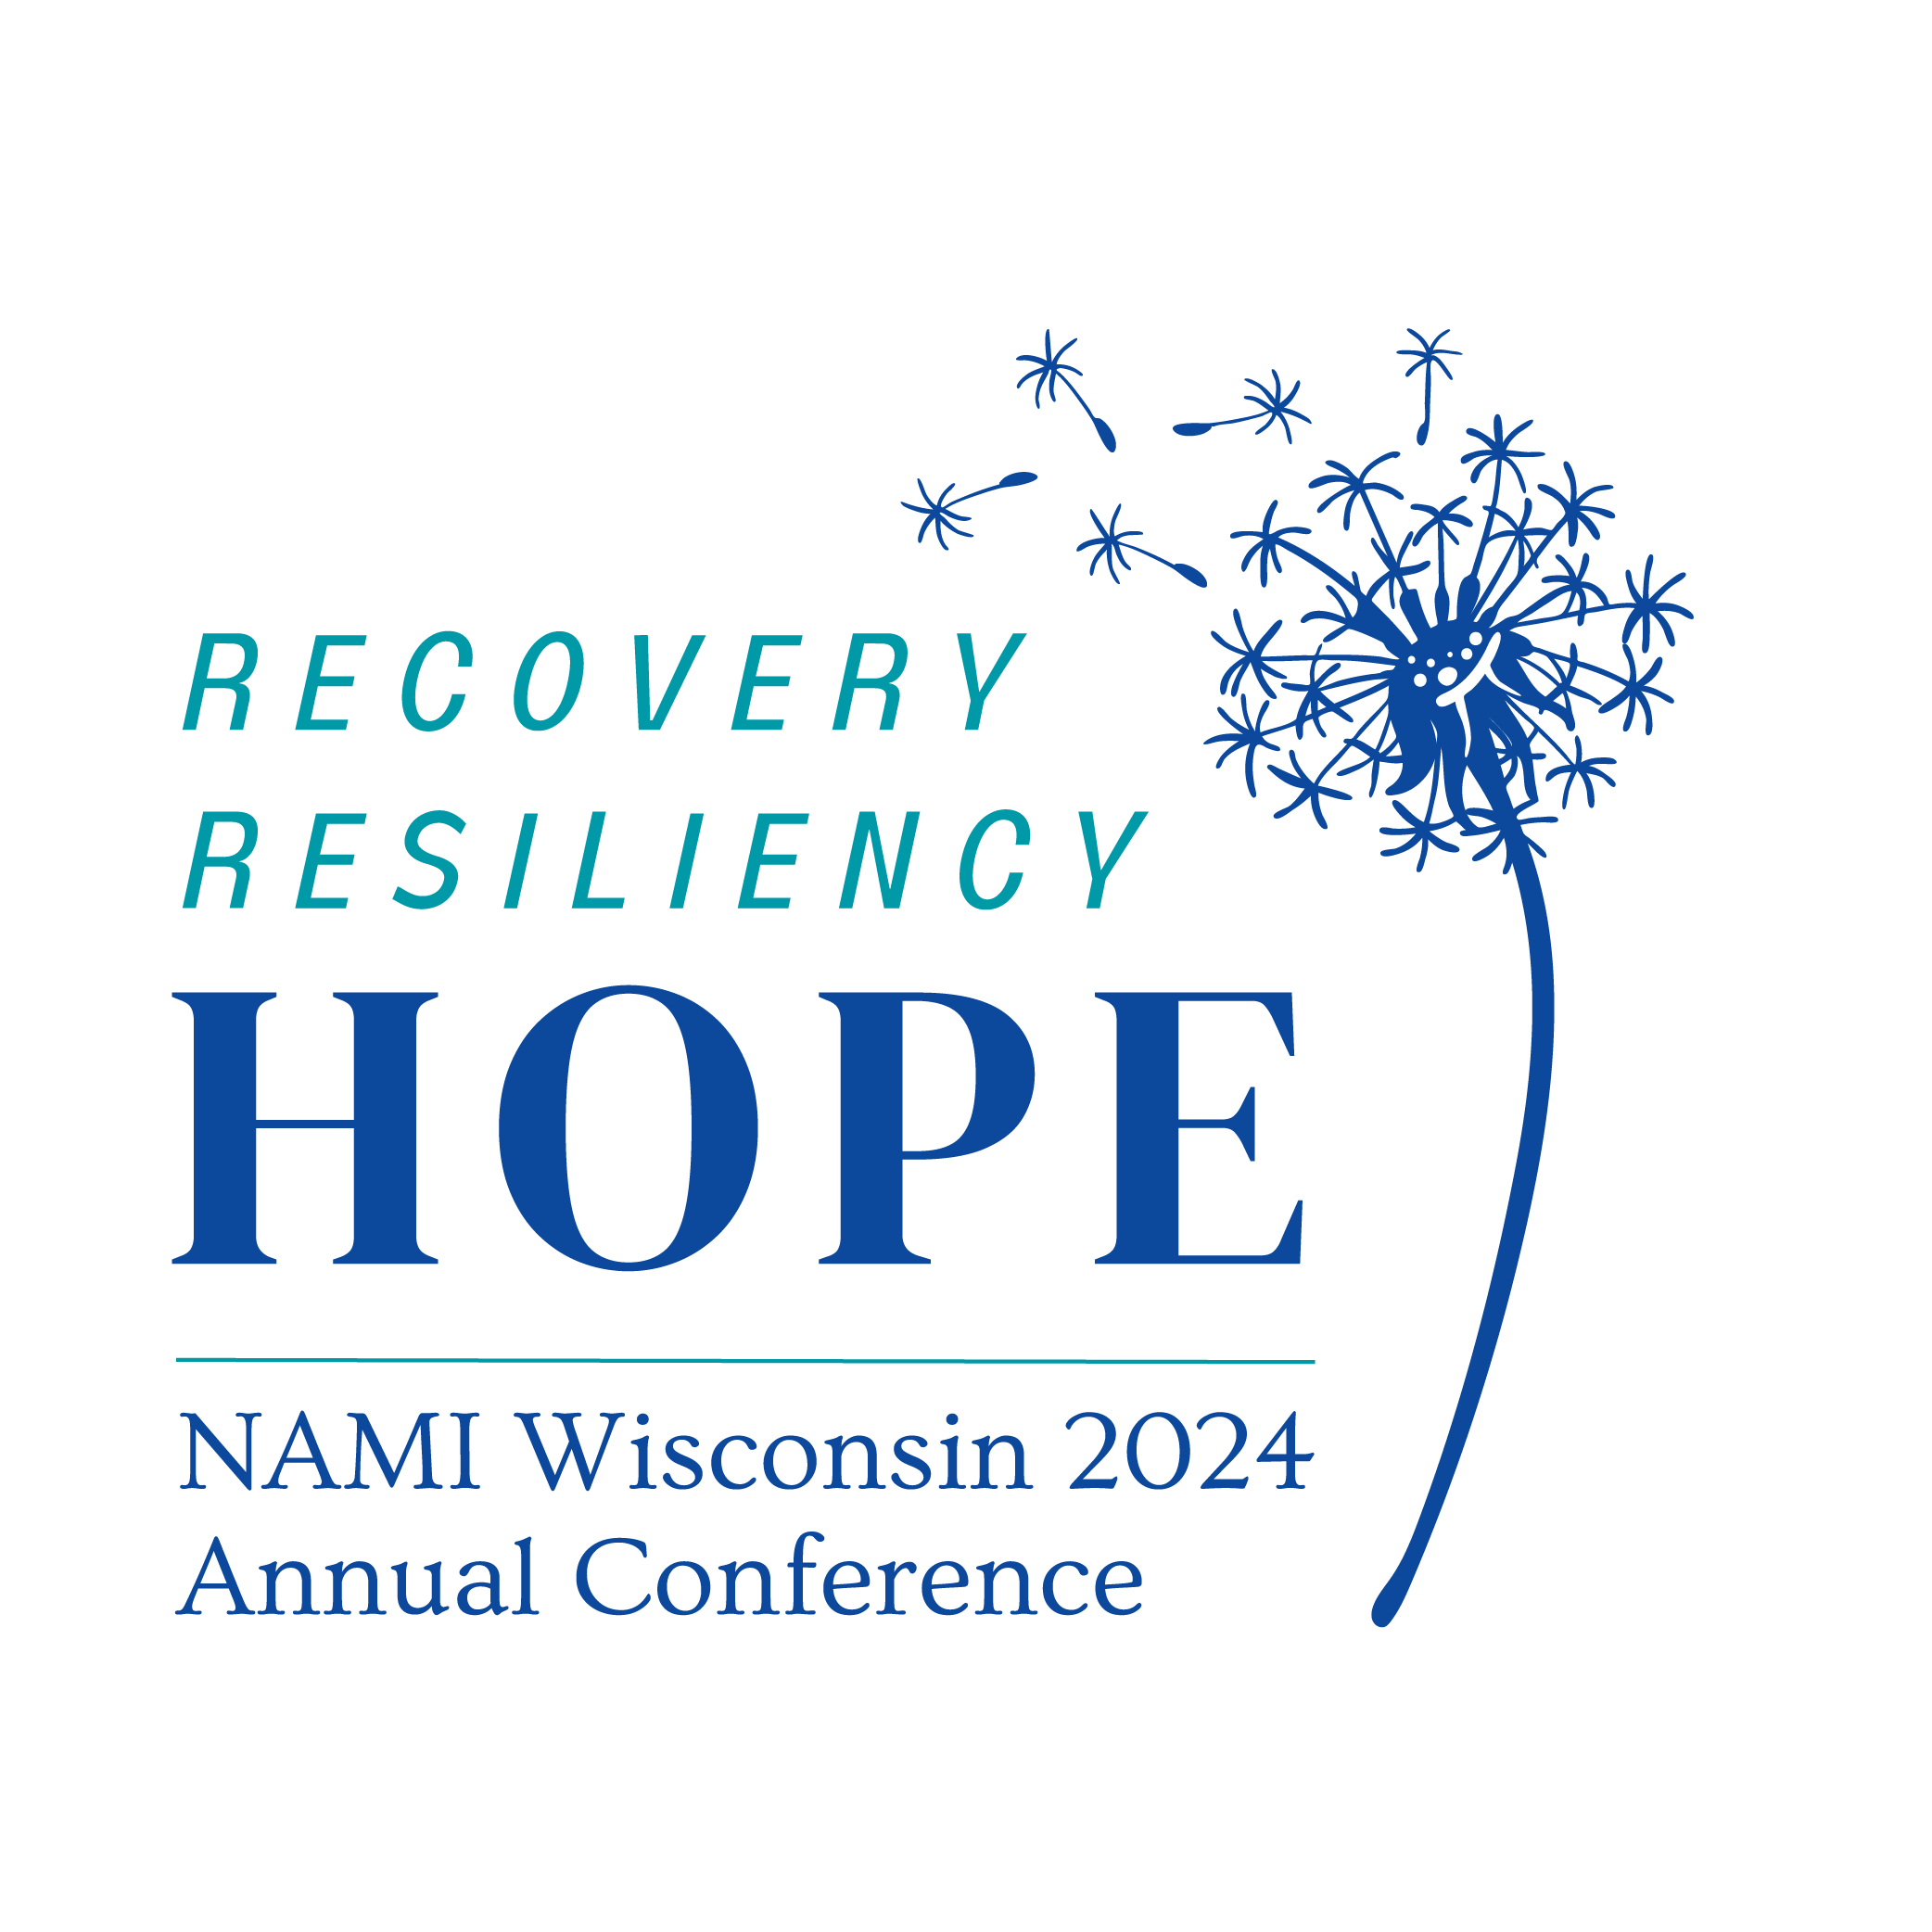 NAMI Wisconsin 2024 Annual Conference